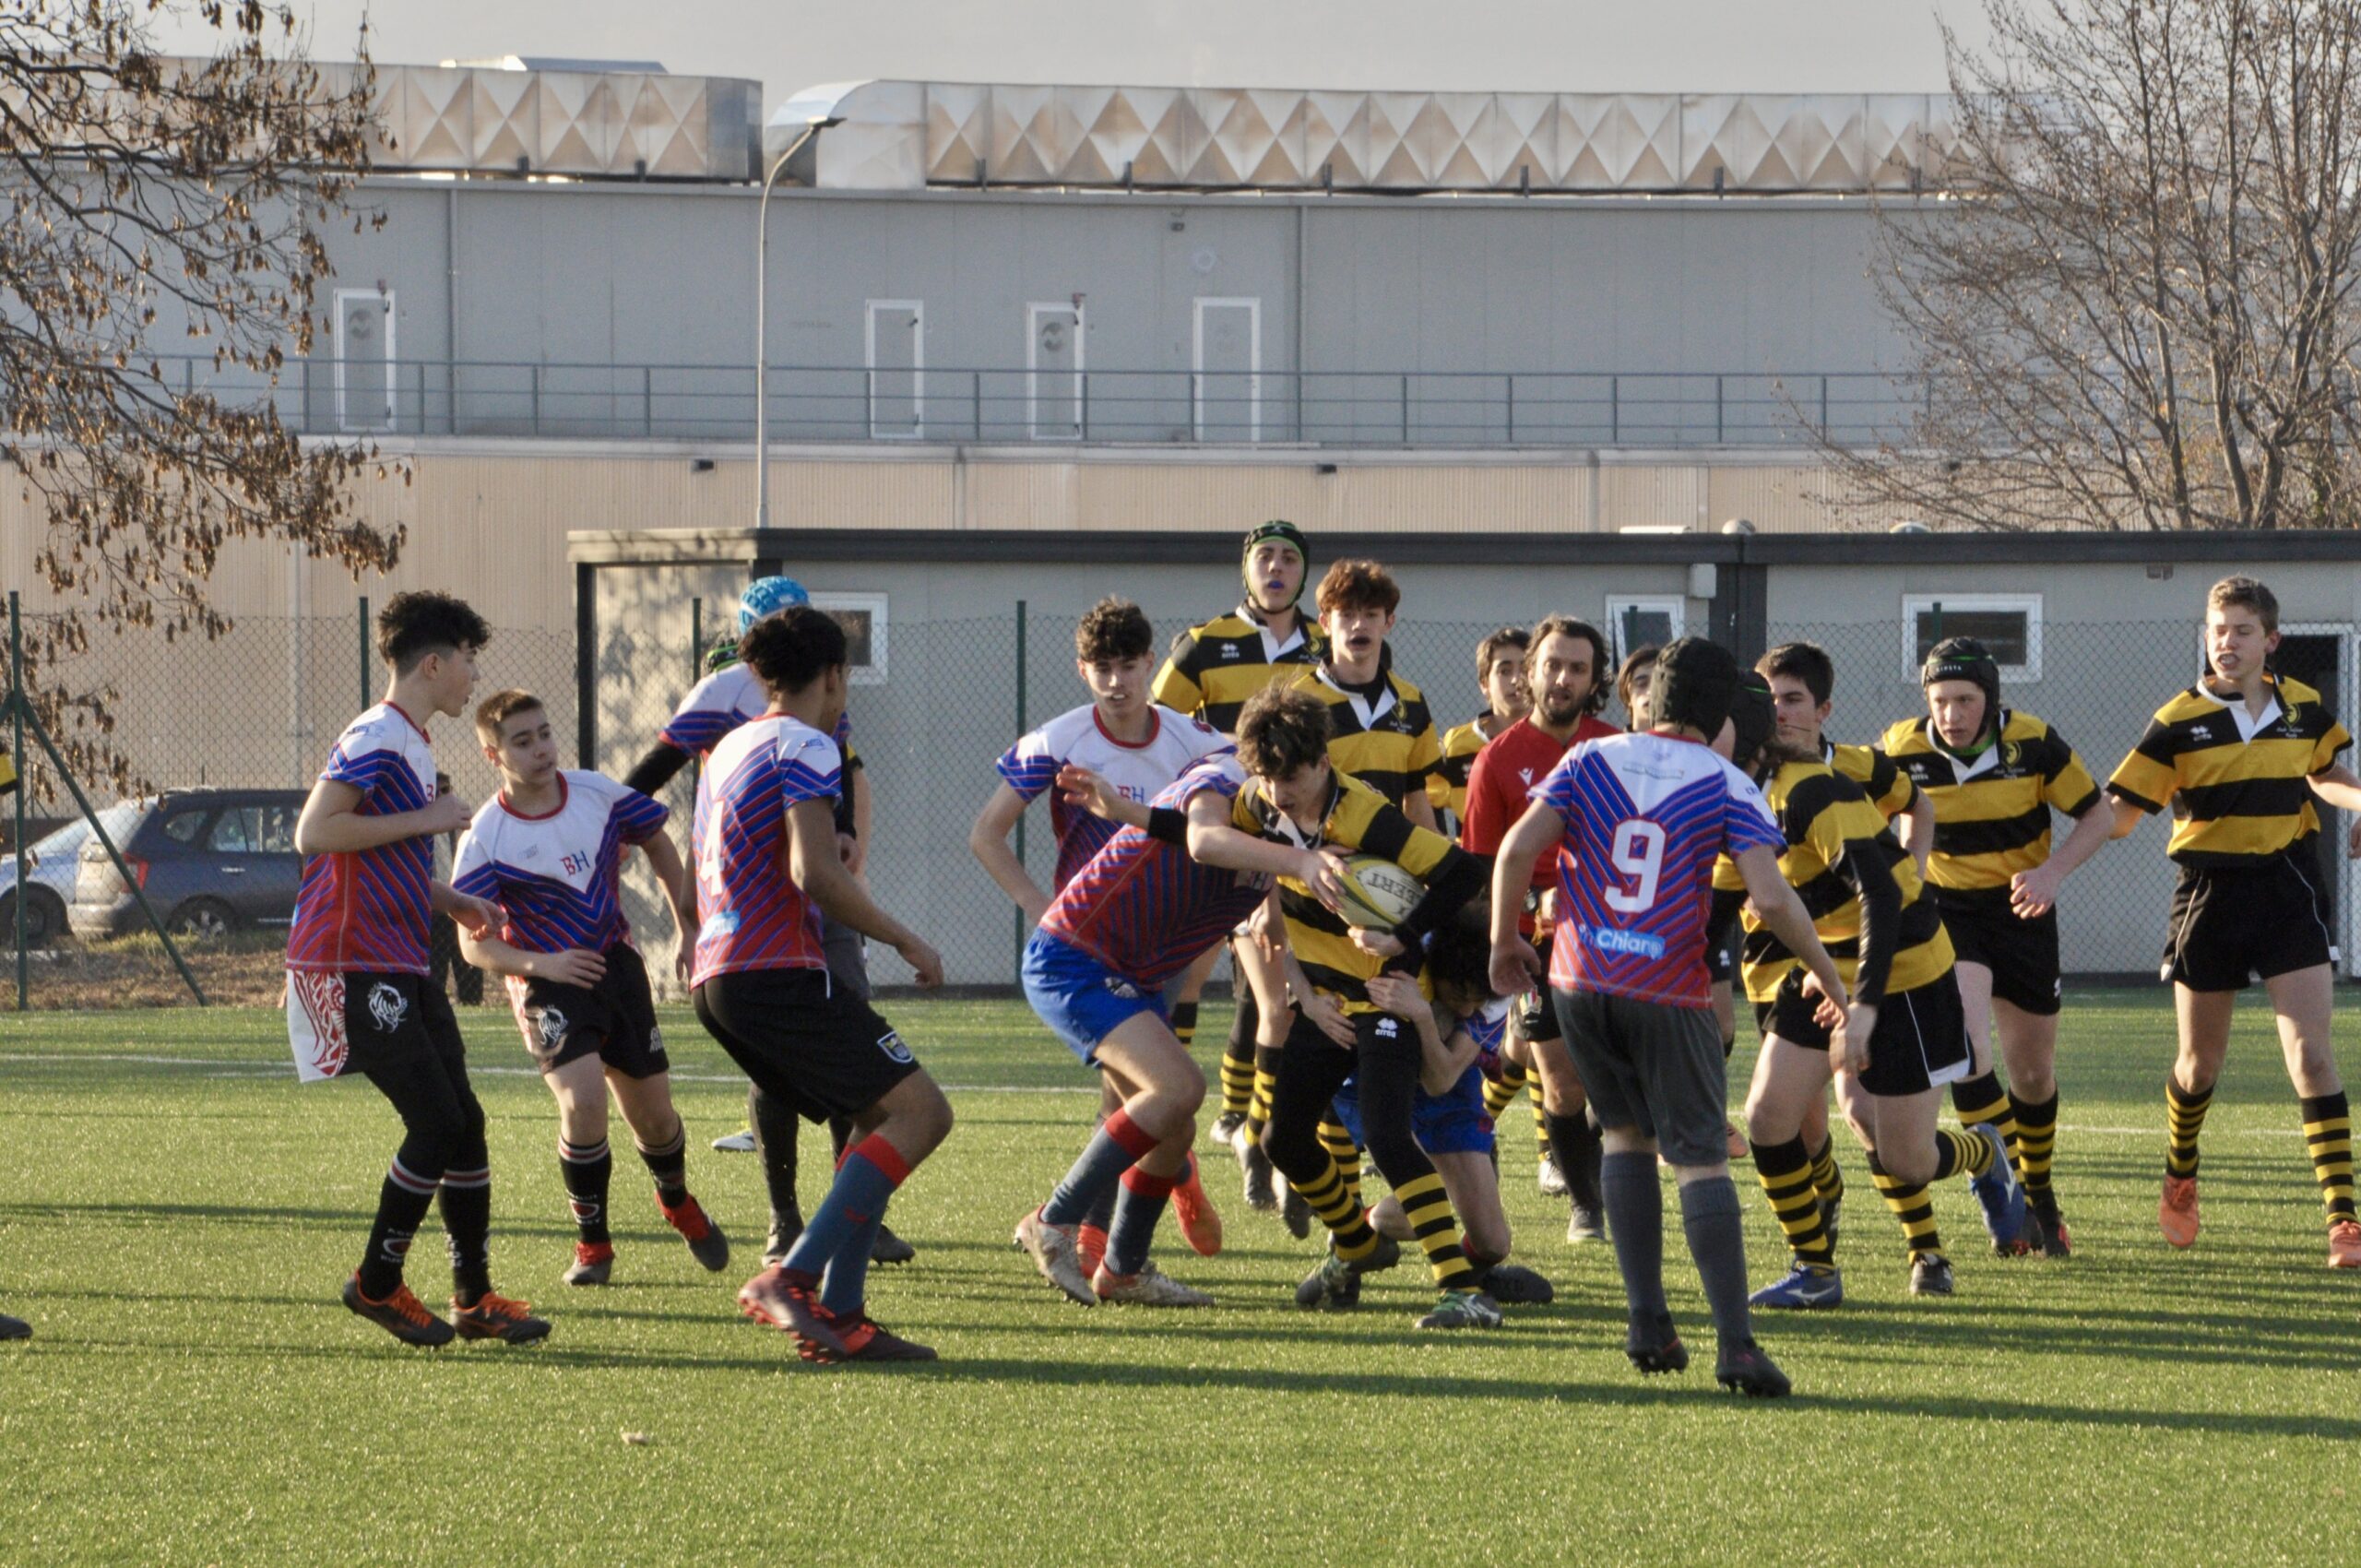 Stade Valdôtain Rugby: weekend di match